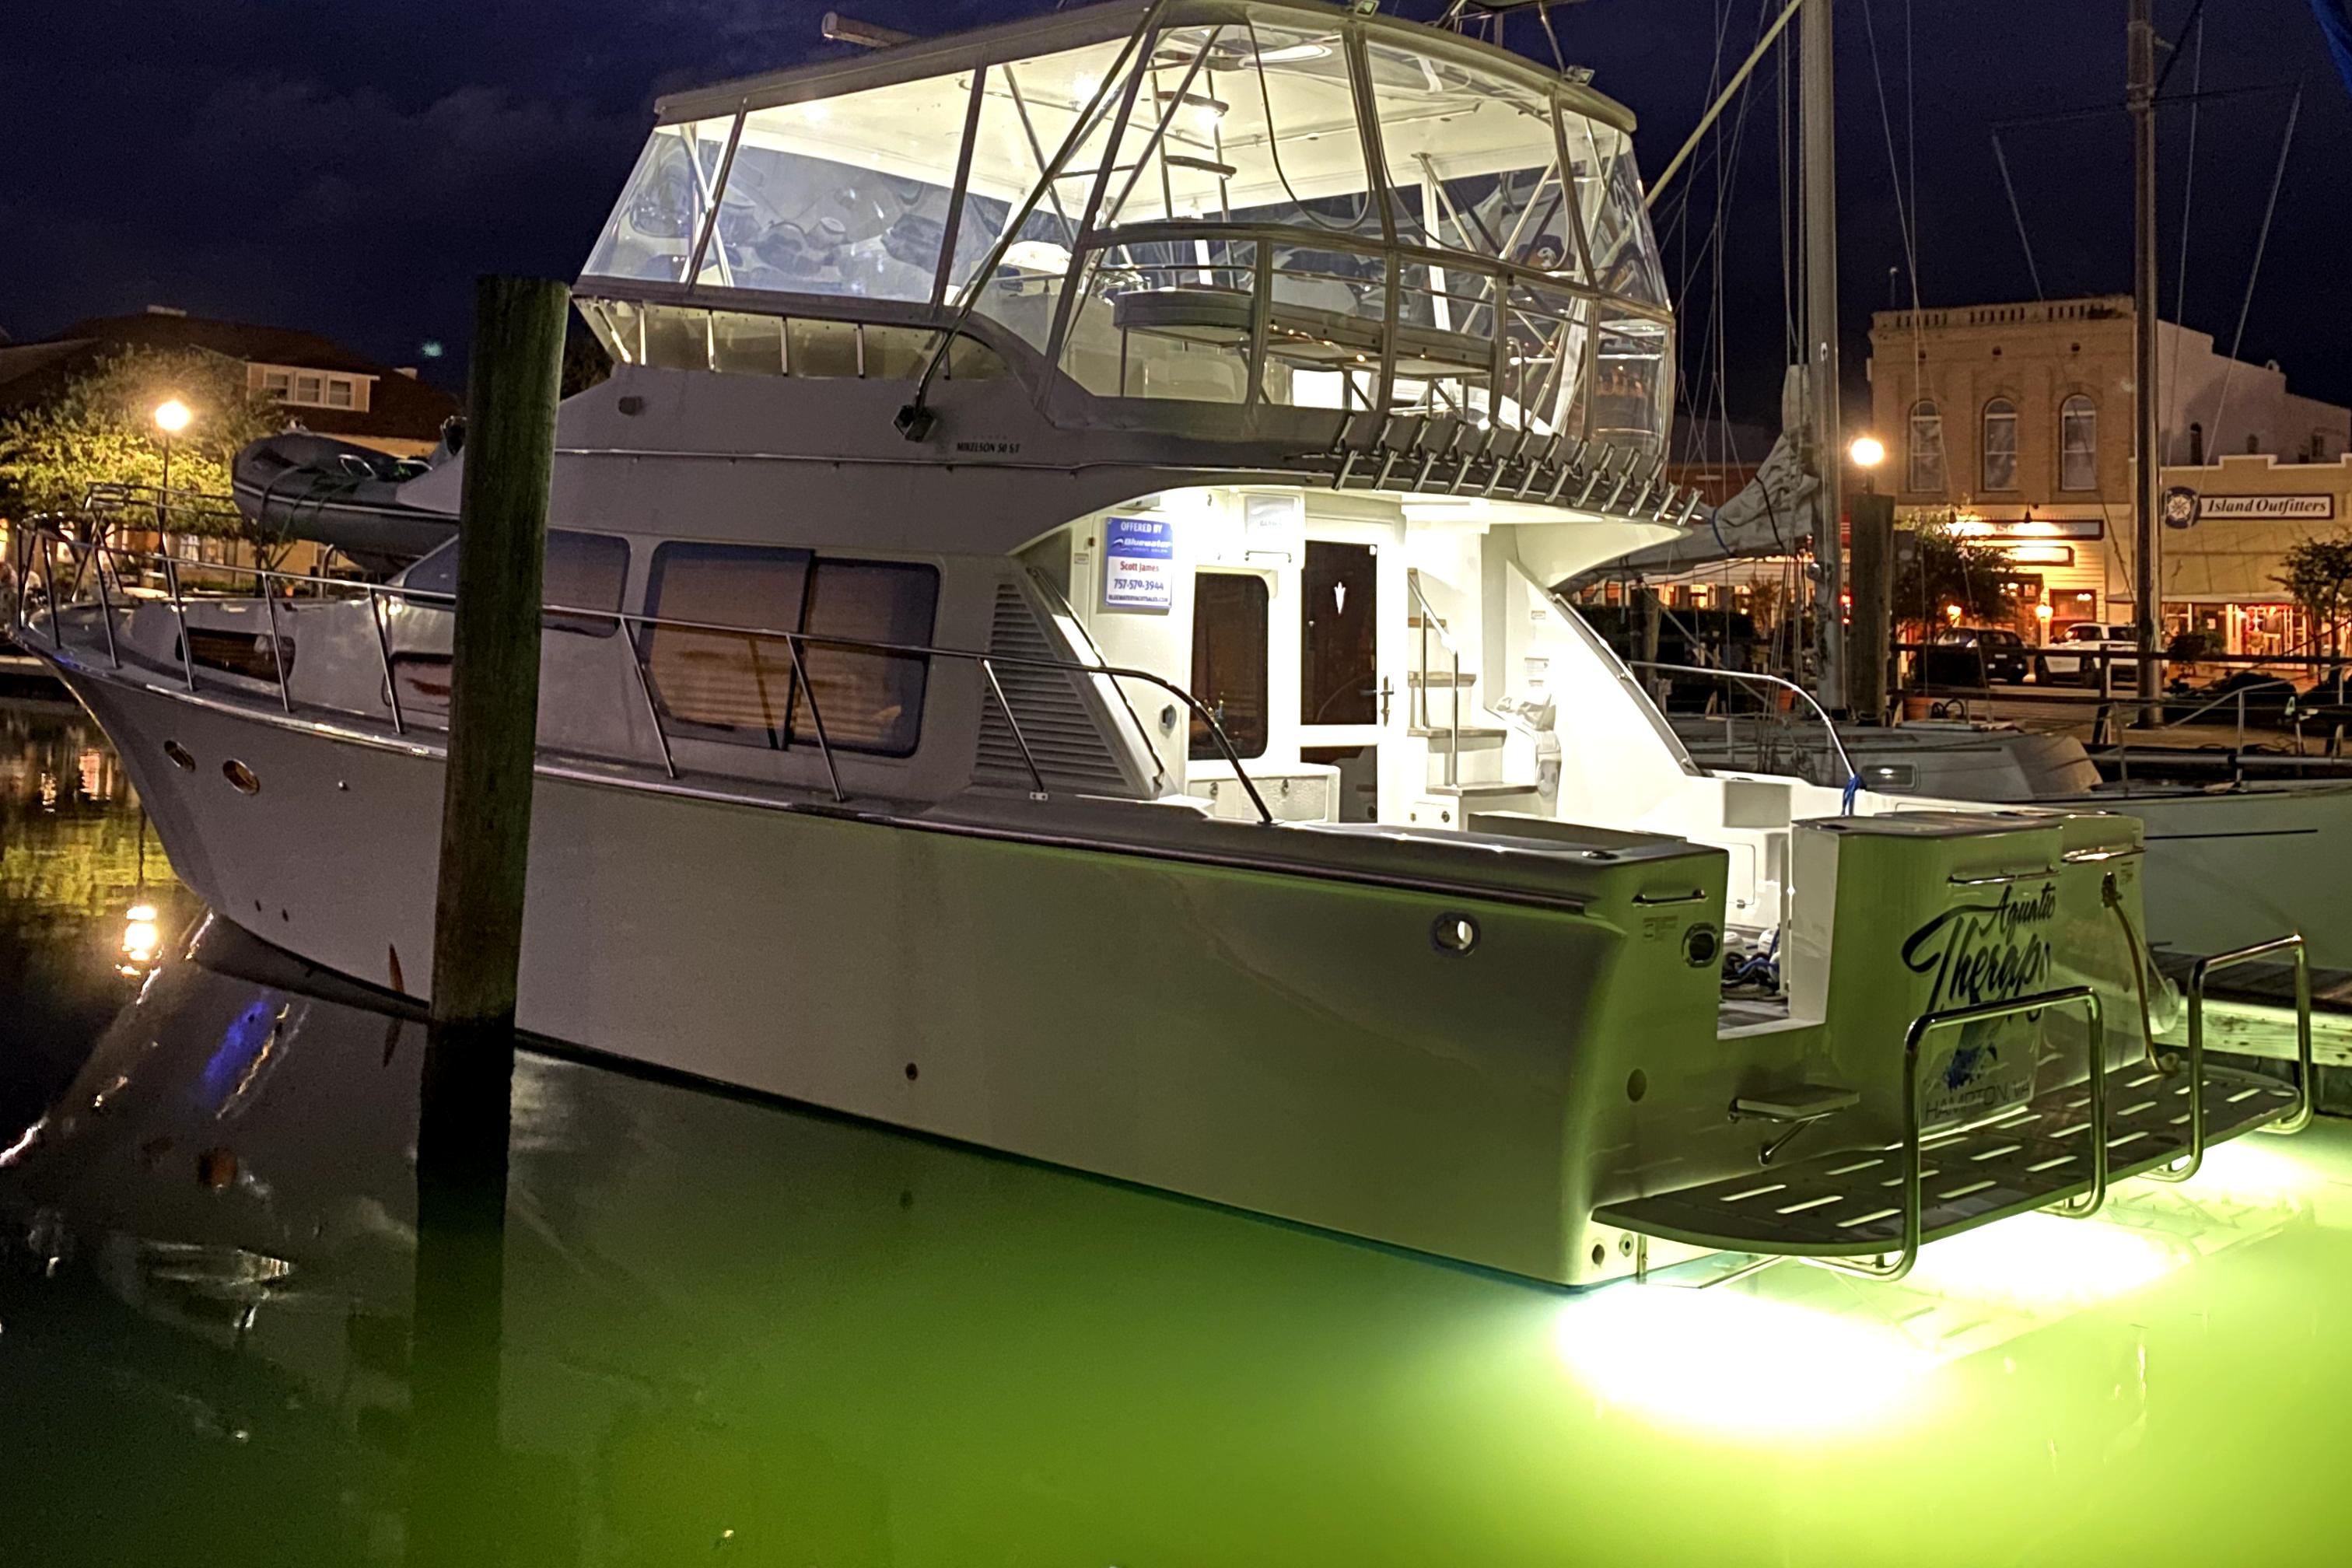 2016 Mikelson 50' S/F, underwater Lighting